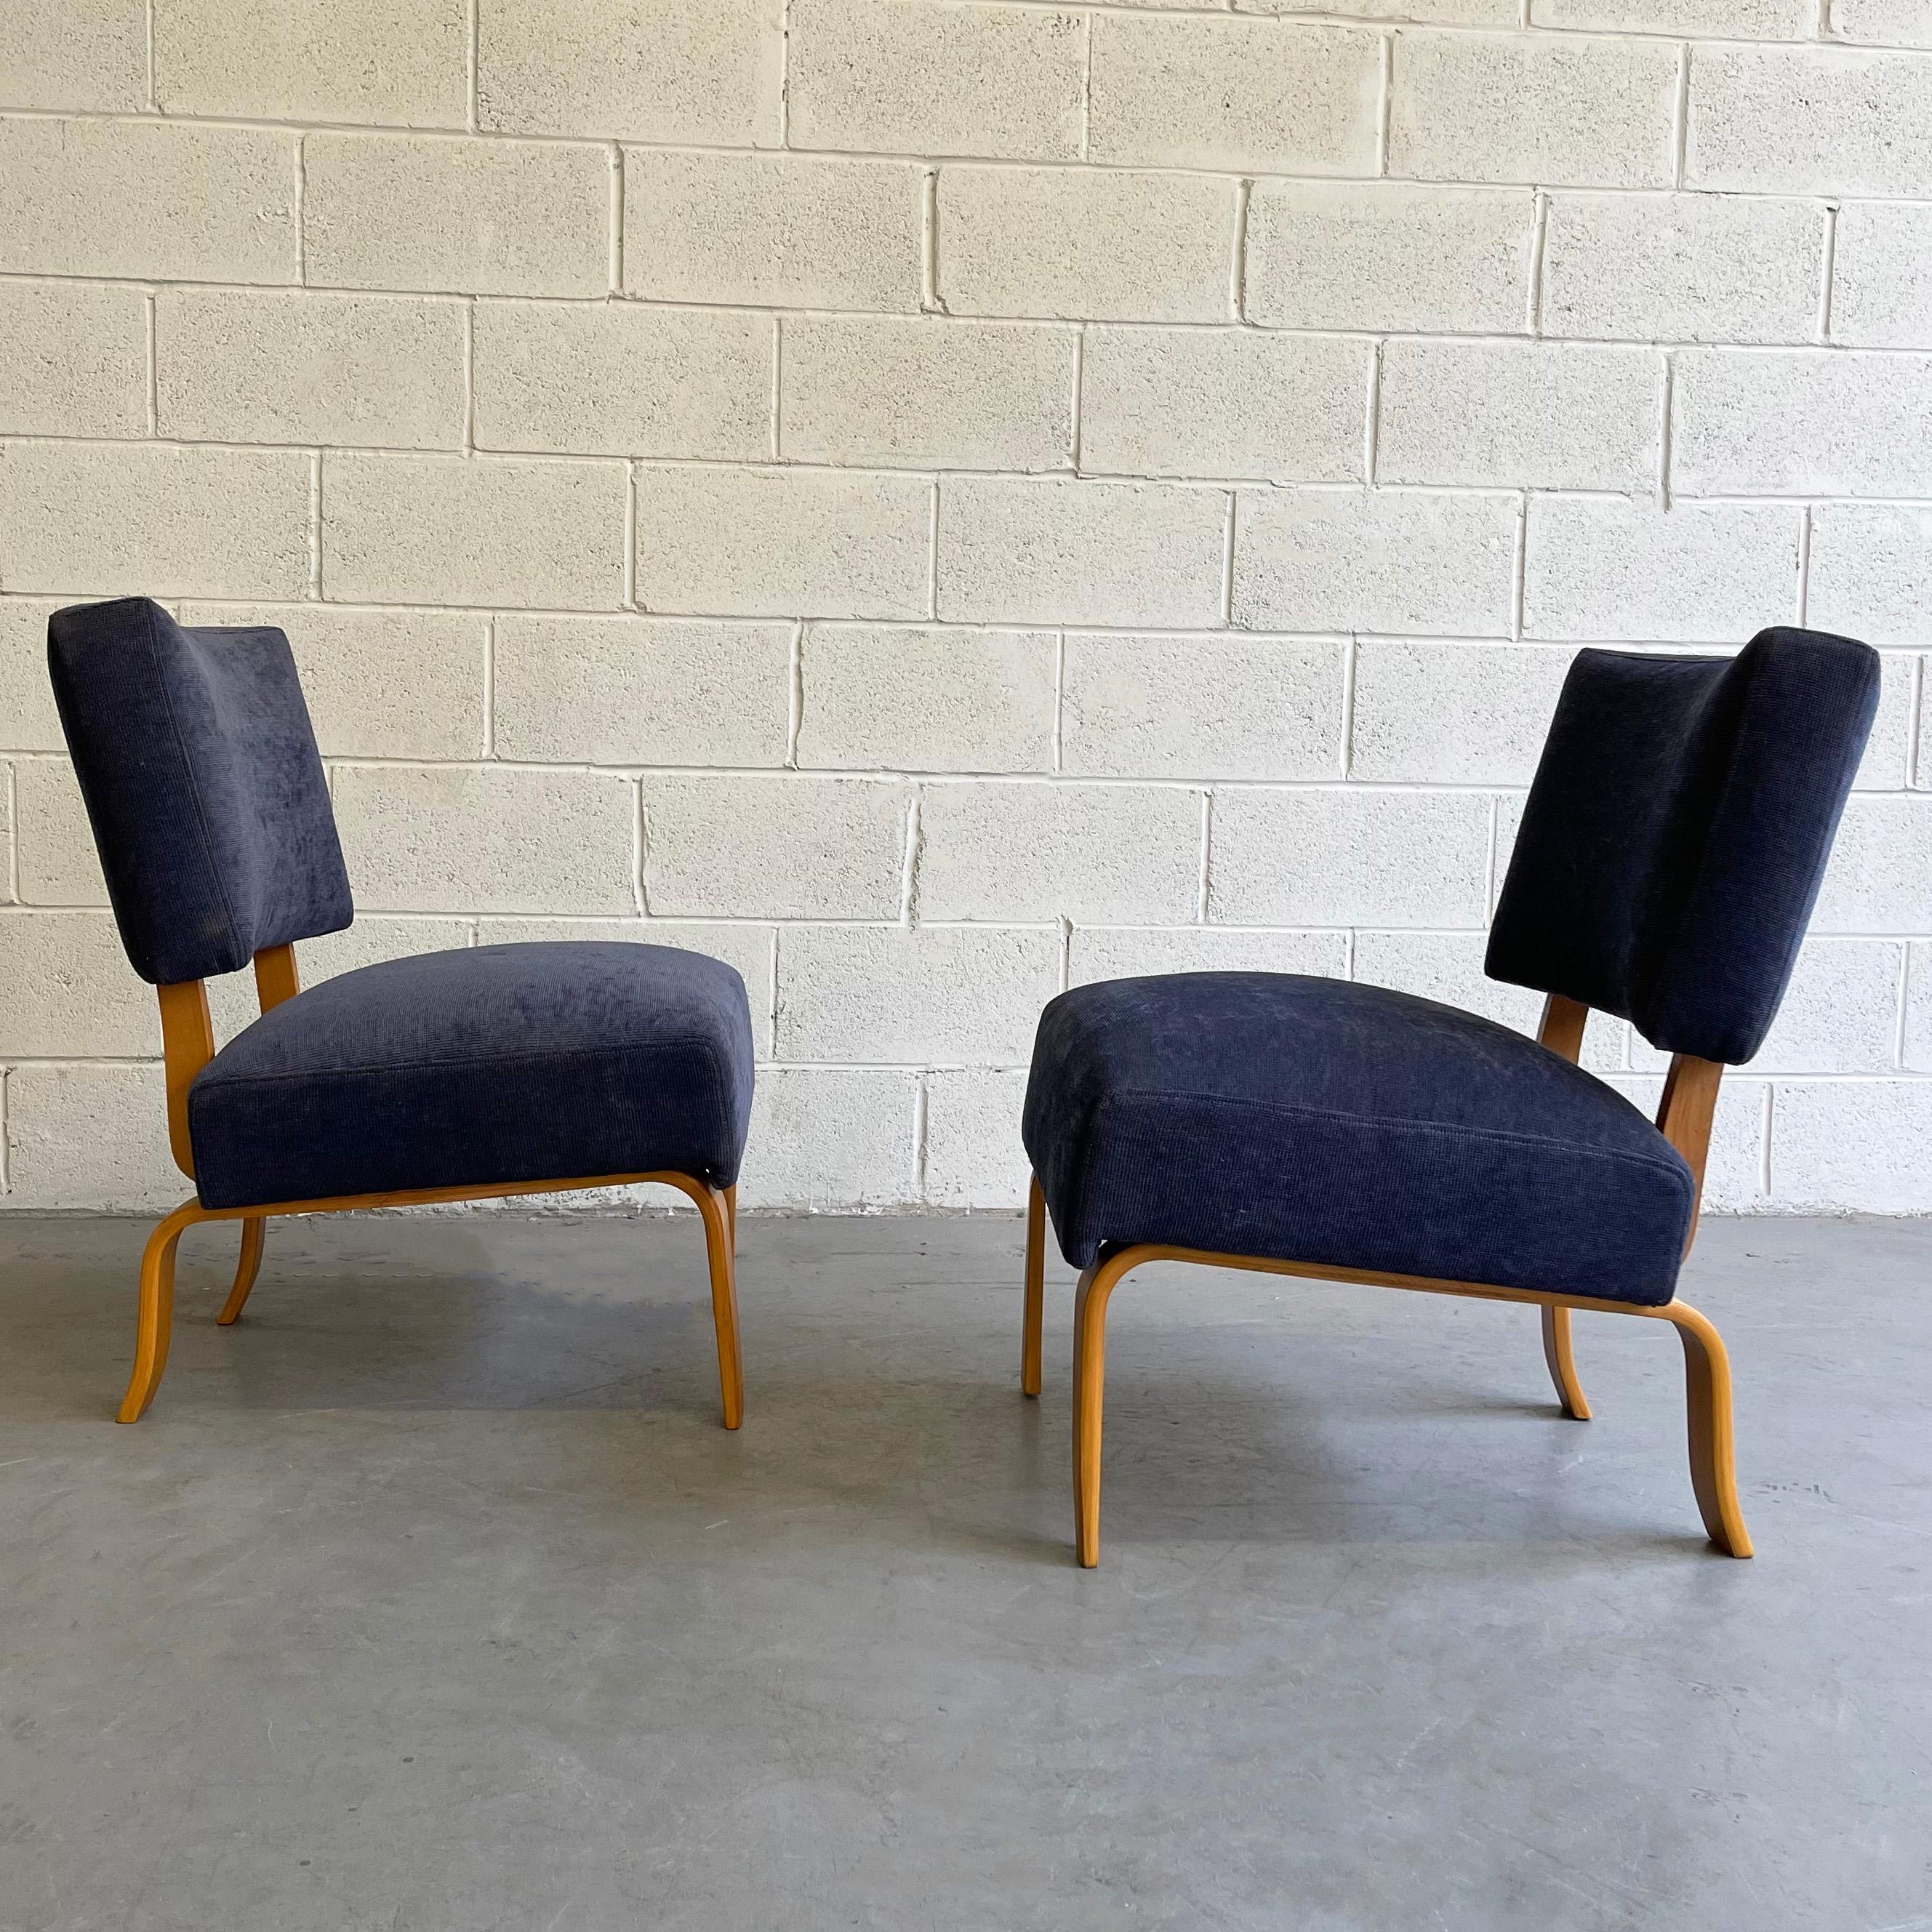 Pair of slipper lounge chairs by Thonet feature natural bent maple frames with deep blue corduroy upholstered seats and backs.